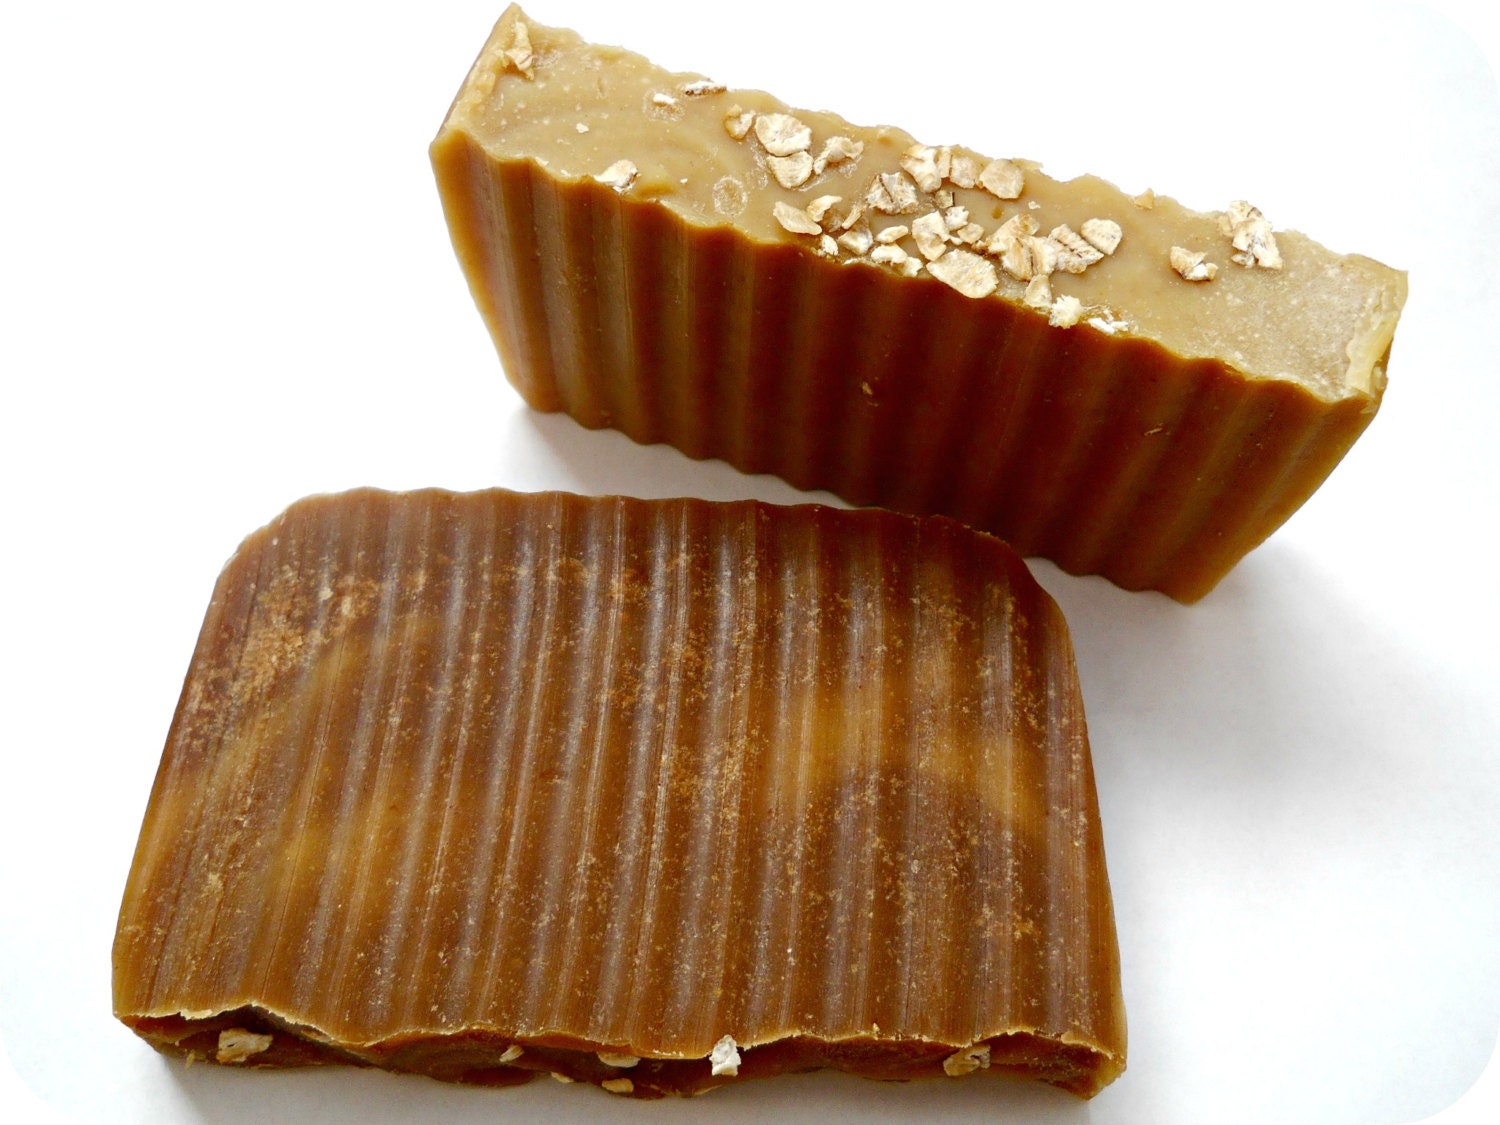 Toasted Oatmeal, Sweet Milk, and Warm Honey Cold Process Bar Soap - handmade & natural - almond, vanilla, and anise scented or unscented